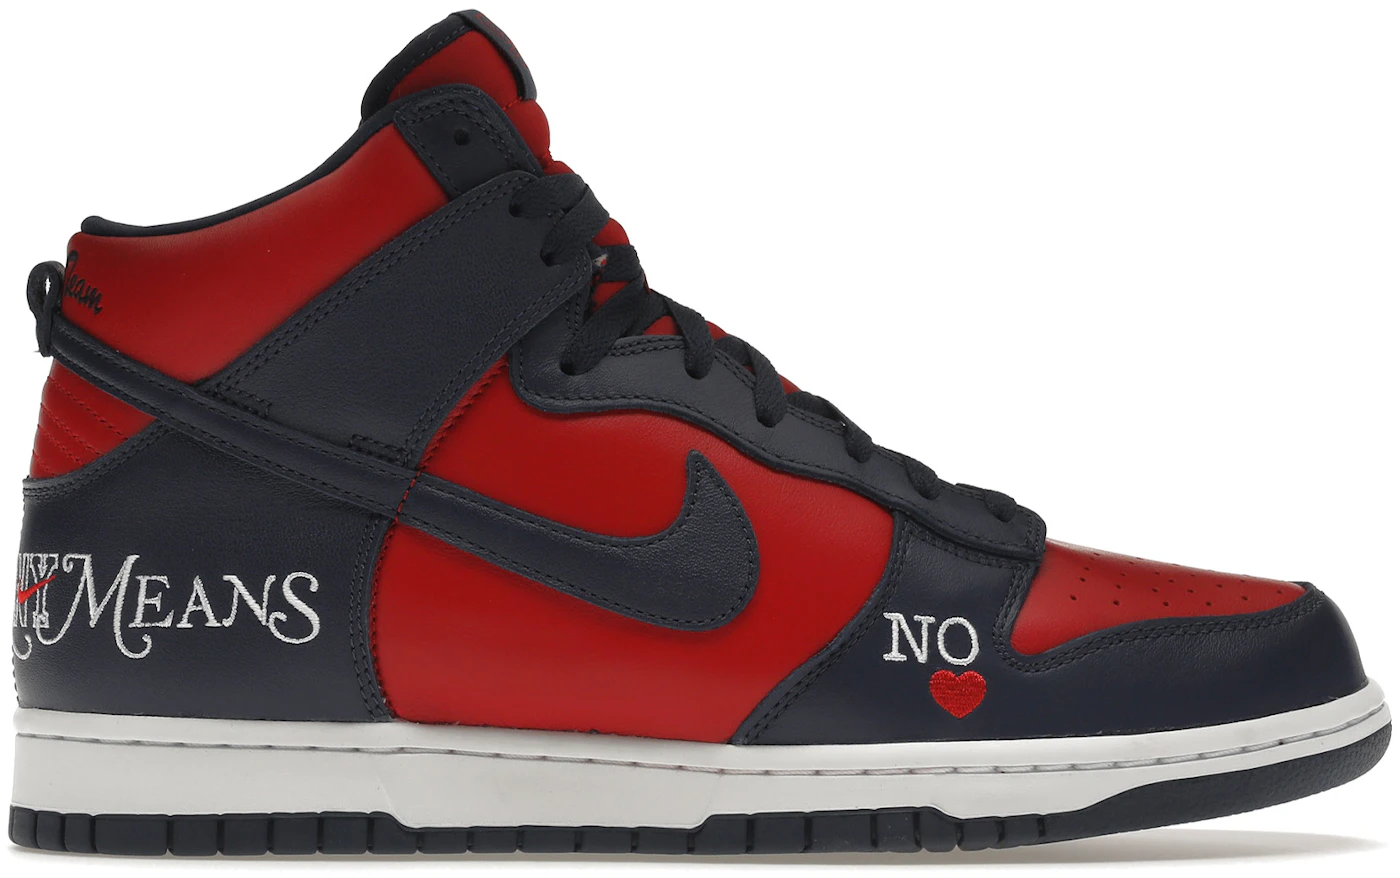 Nike SB Dunk High By Means Navy - DN3741-600 - US